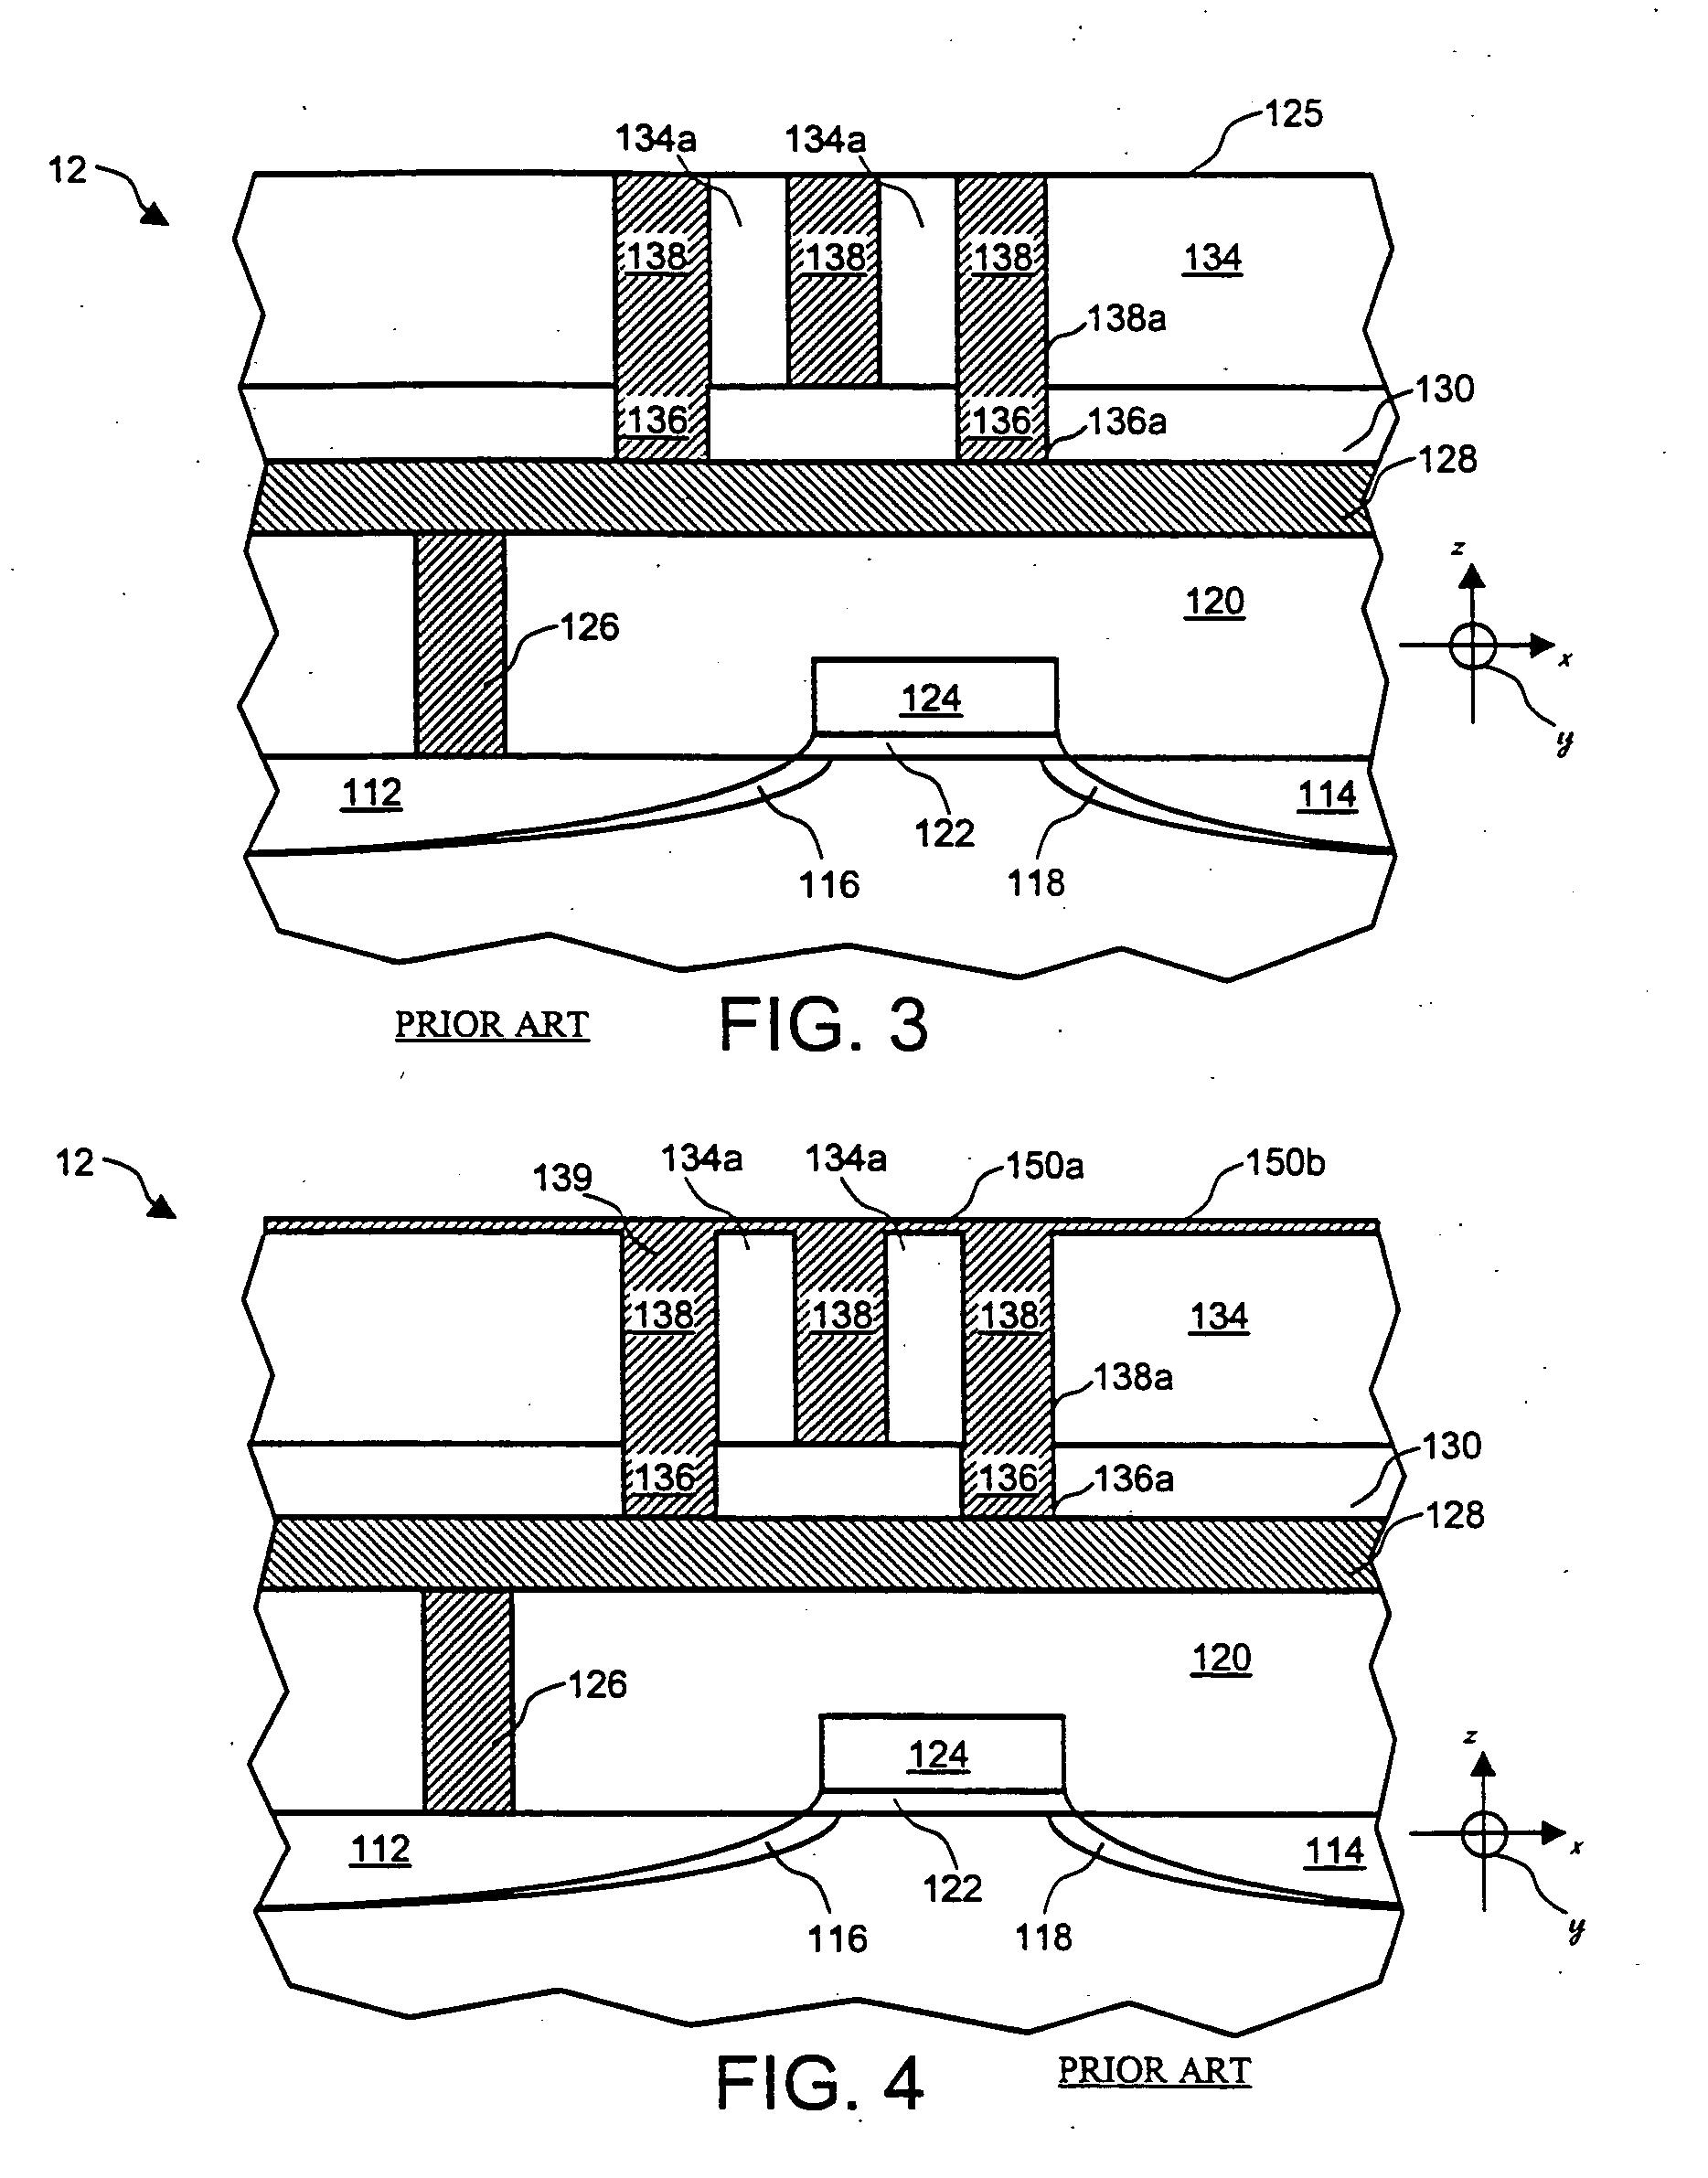 Method of measuring meso-scale structures on wafers